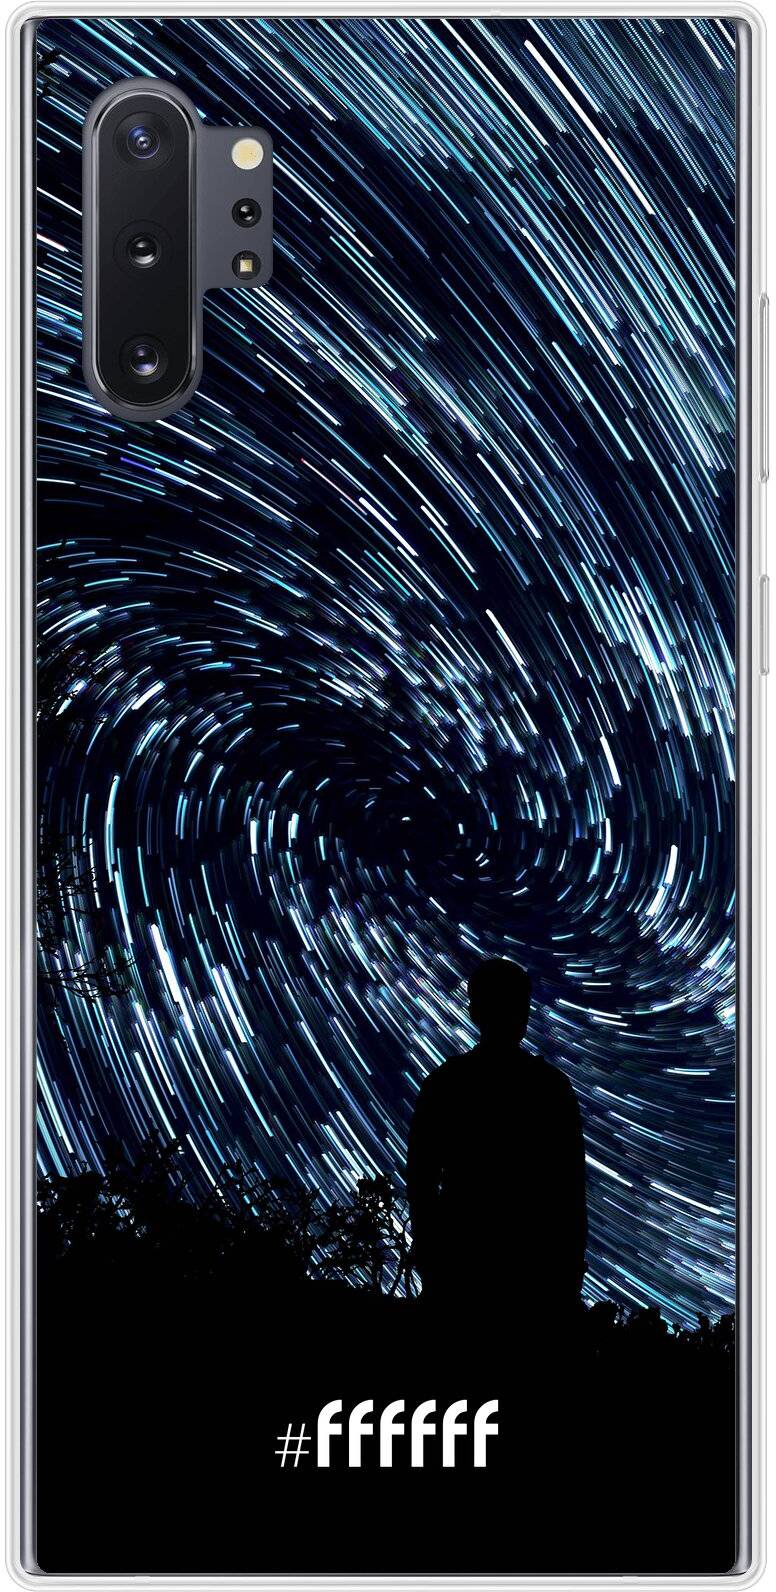 Starry Circles Galaxy Note 10 Plus